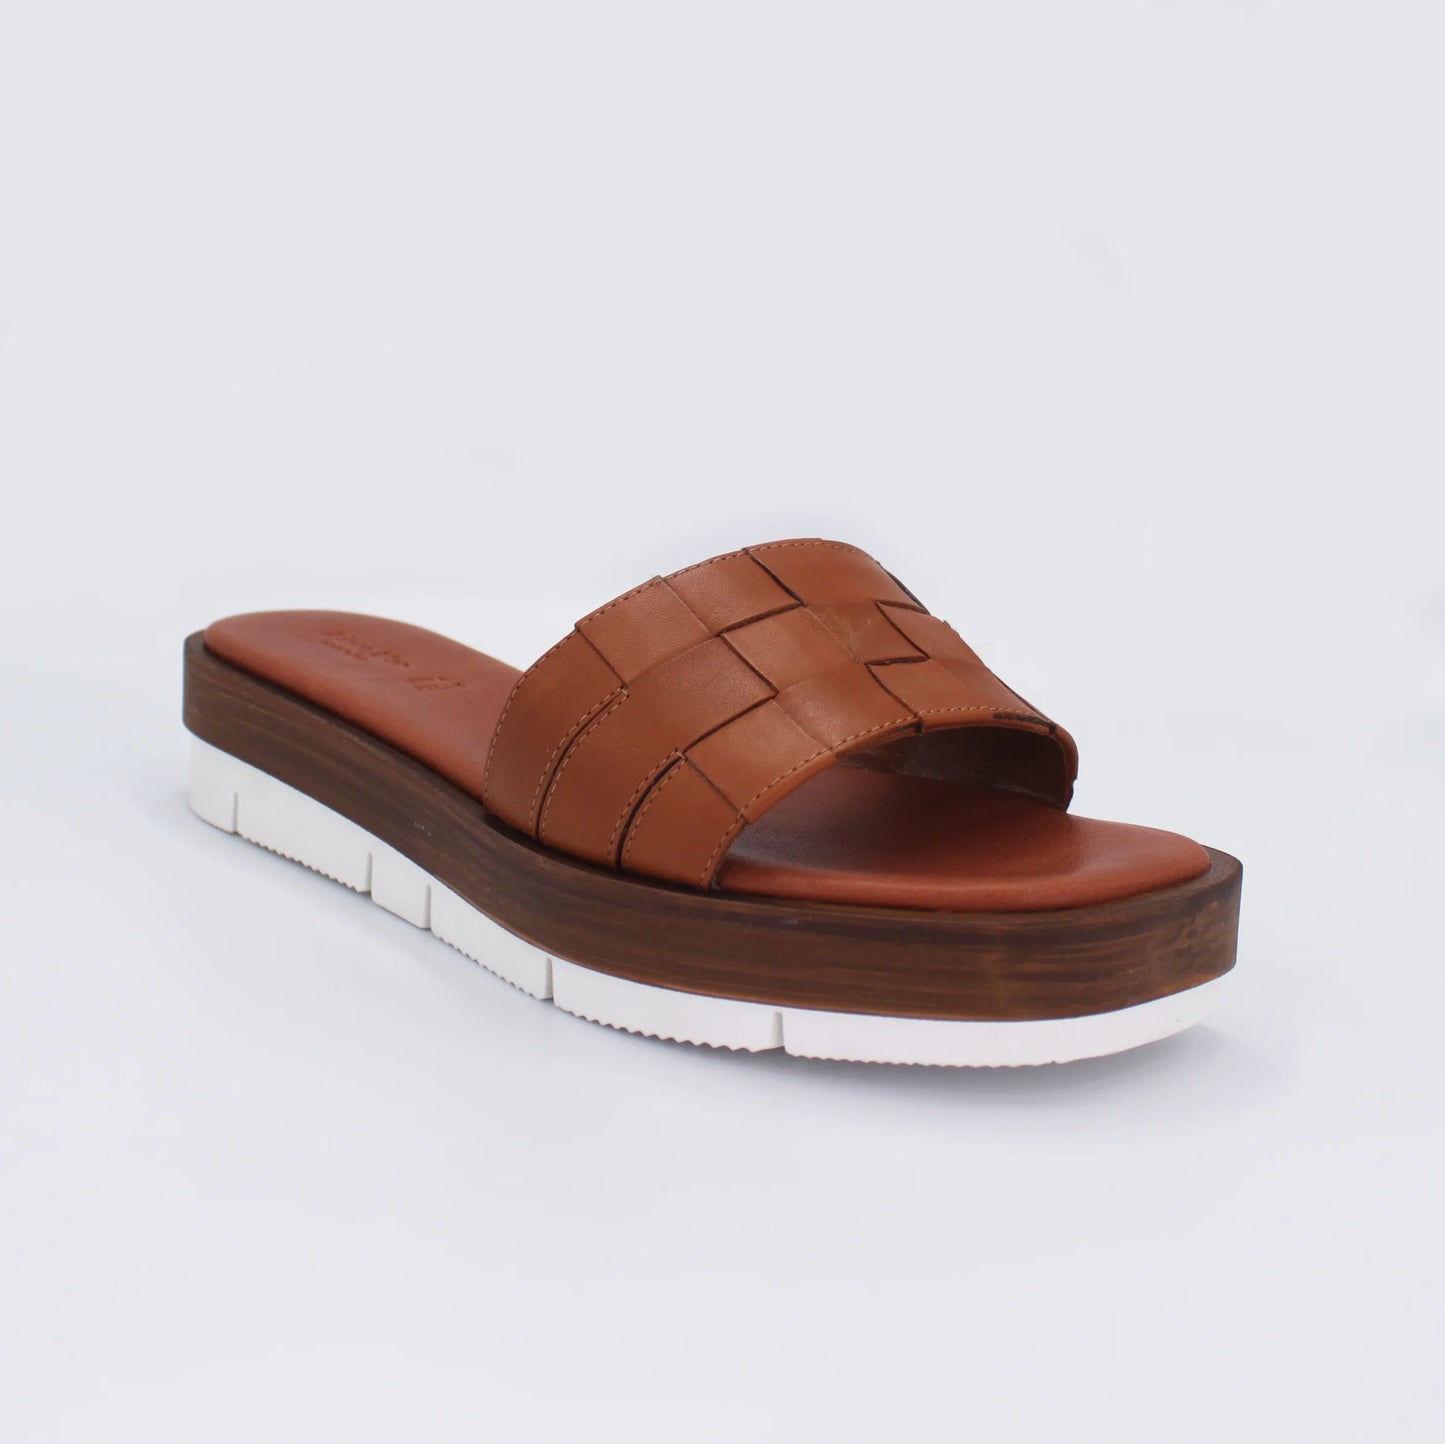 Shop Handmade Italian Leather Sandal in Cognac (2150) or browse our range of hand-made Italian sandals for women in leather or suede in-store at Aliverti Durban or Cape Town, or shop online. We deliver in South Africa & offer multiple payment plans as well as accept multiple safe & secure payment methods.